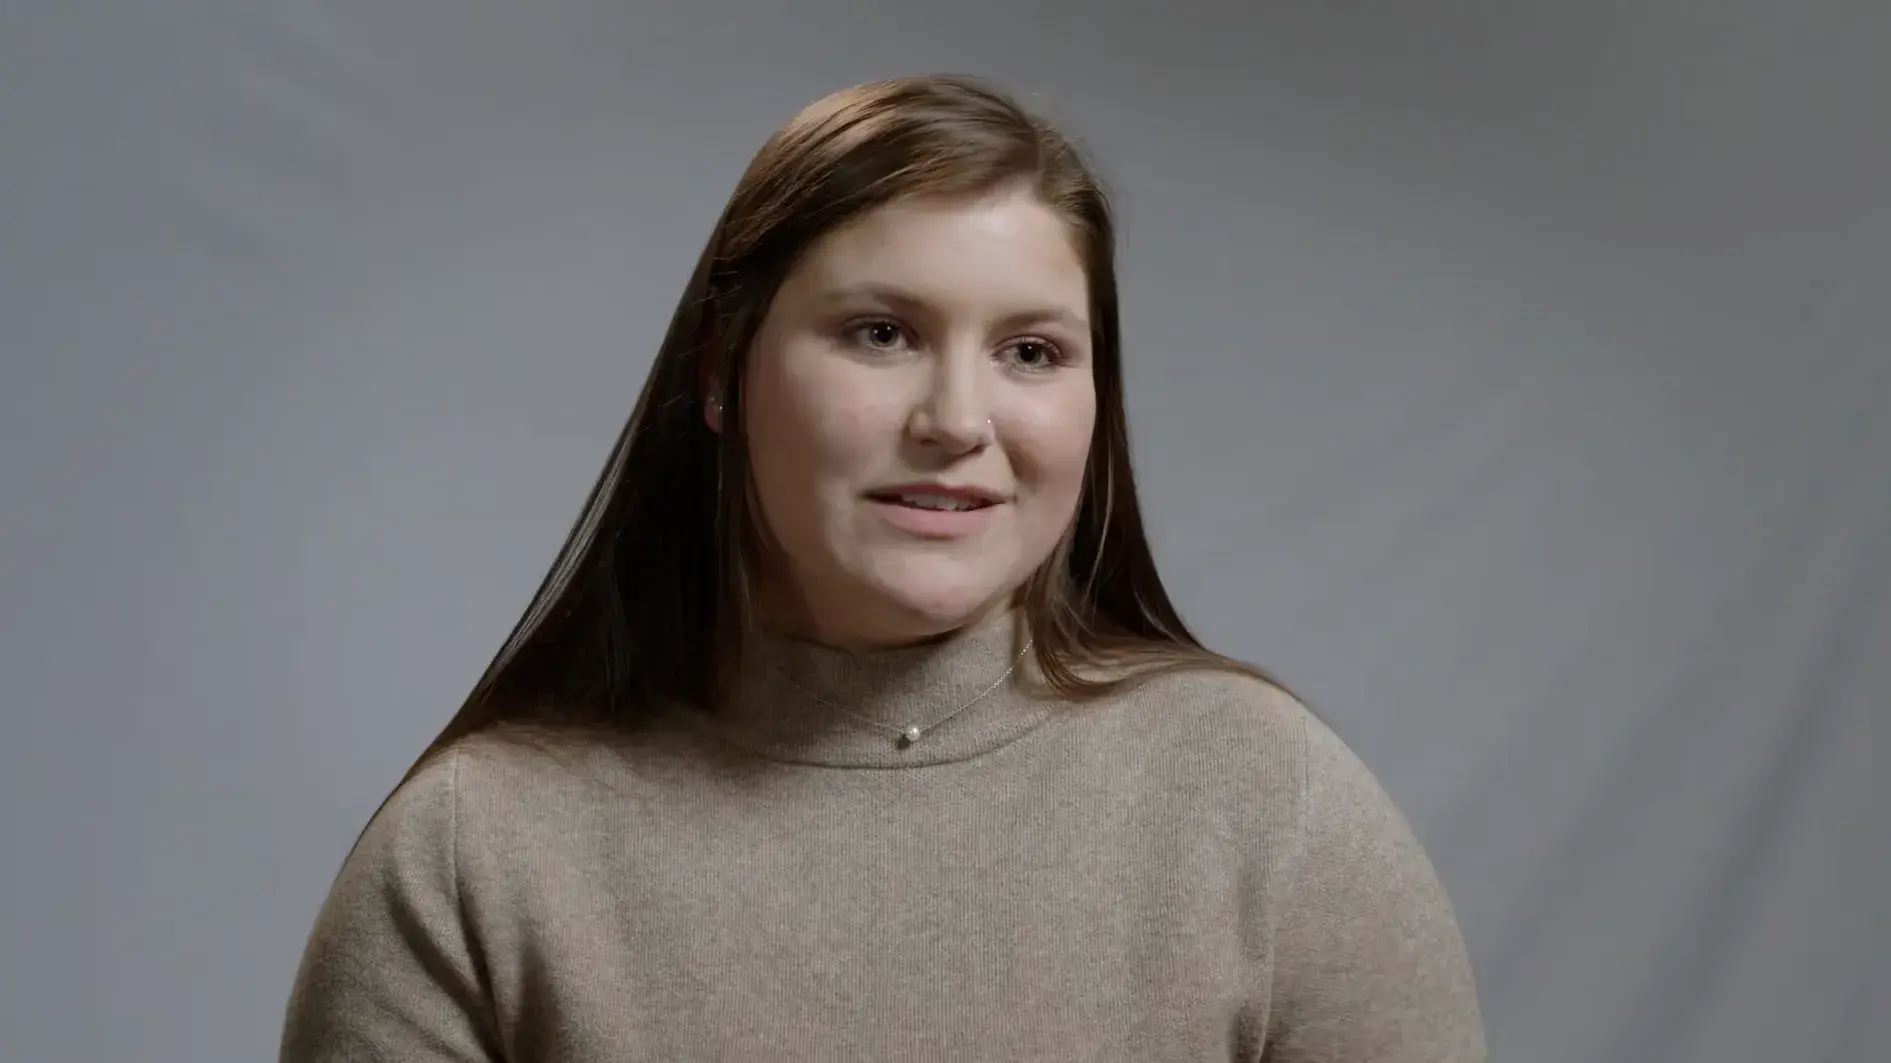 Ohio State student Maddie talks about how scholarships helped her college journey